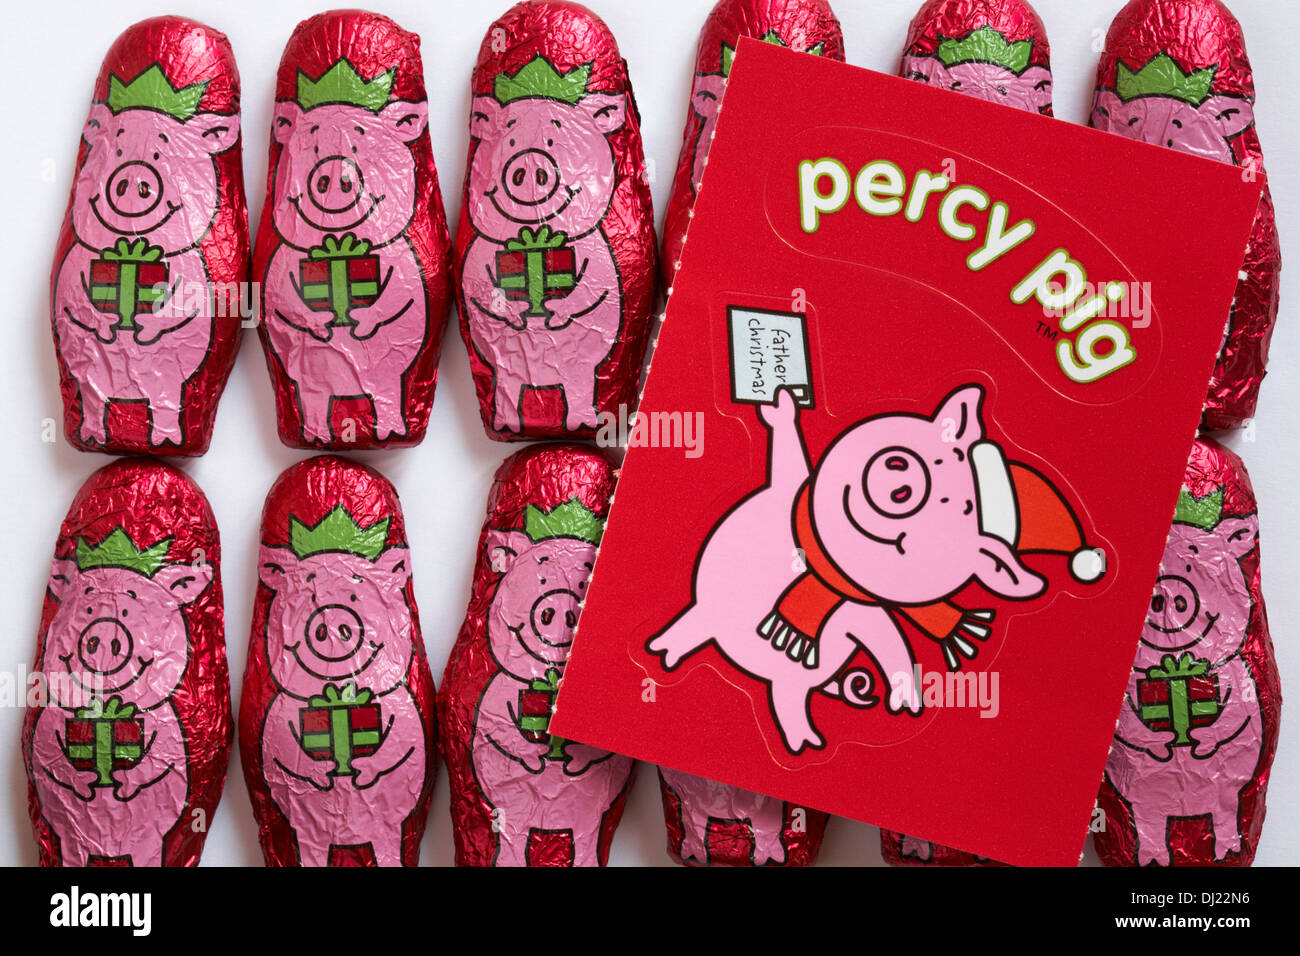 Marks & Spencer percy in the pink solid percy pig shapes made with flavoured white chocolate & dried raspberries with sticker Stock Photo